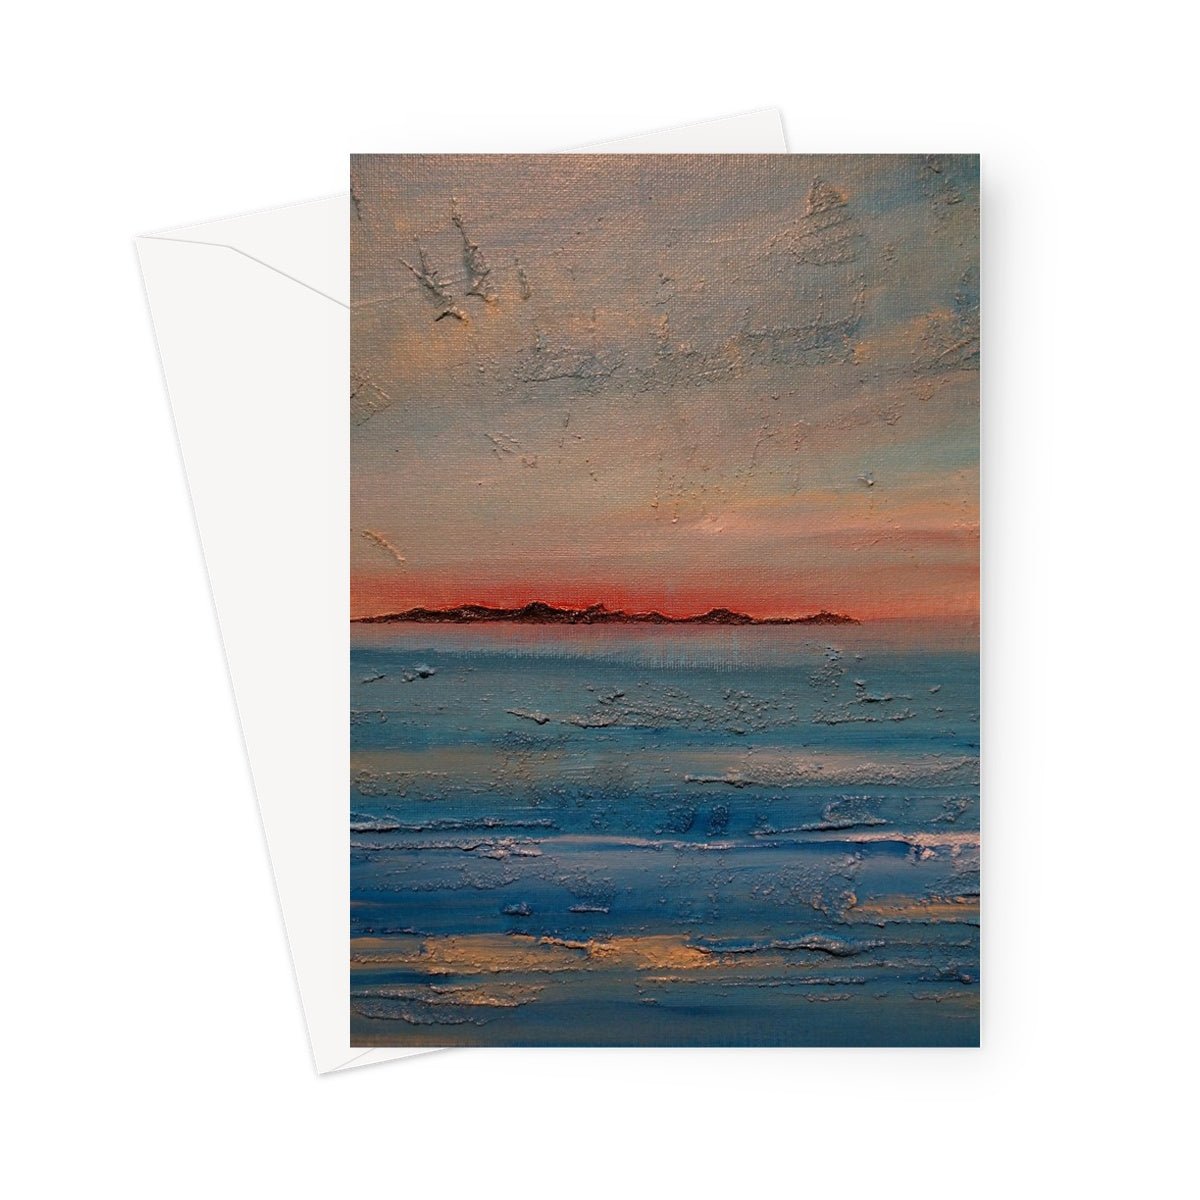 Gigha Sunset Art Gifts Greeting Card-Greetings Cards-Hebridean Islands Art Gallery-5"x7"-1 Card-Paintings, Prints, Homeware, Art Gifts From Scotland By Scottish Artist Kevin Hunter